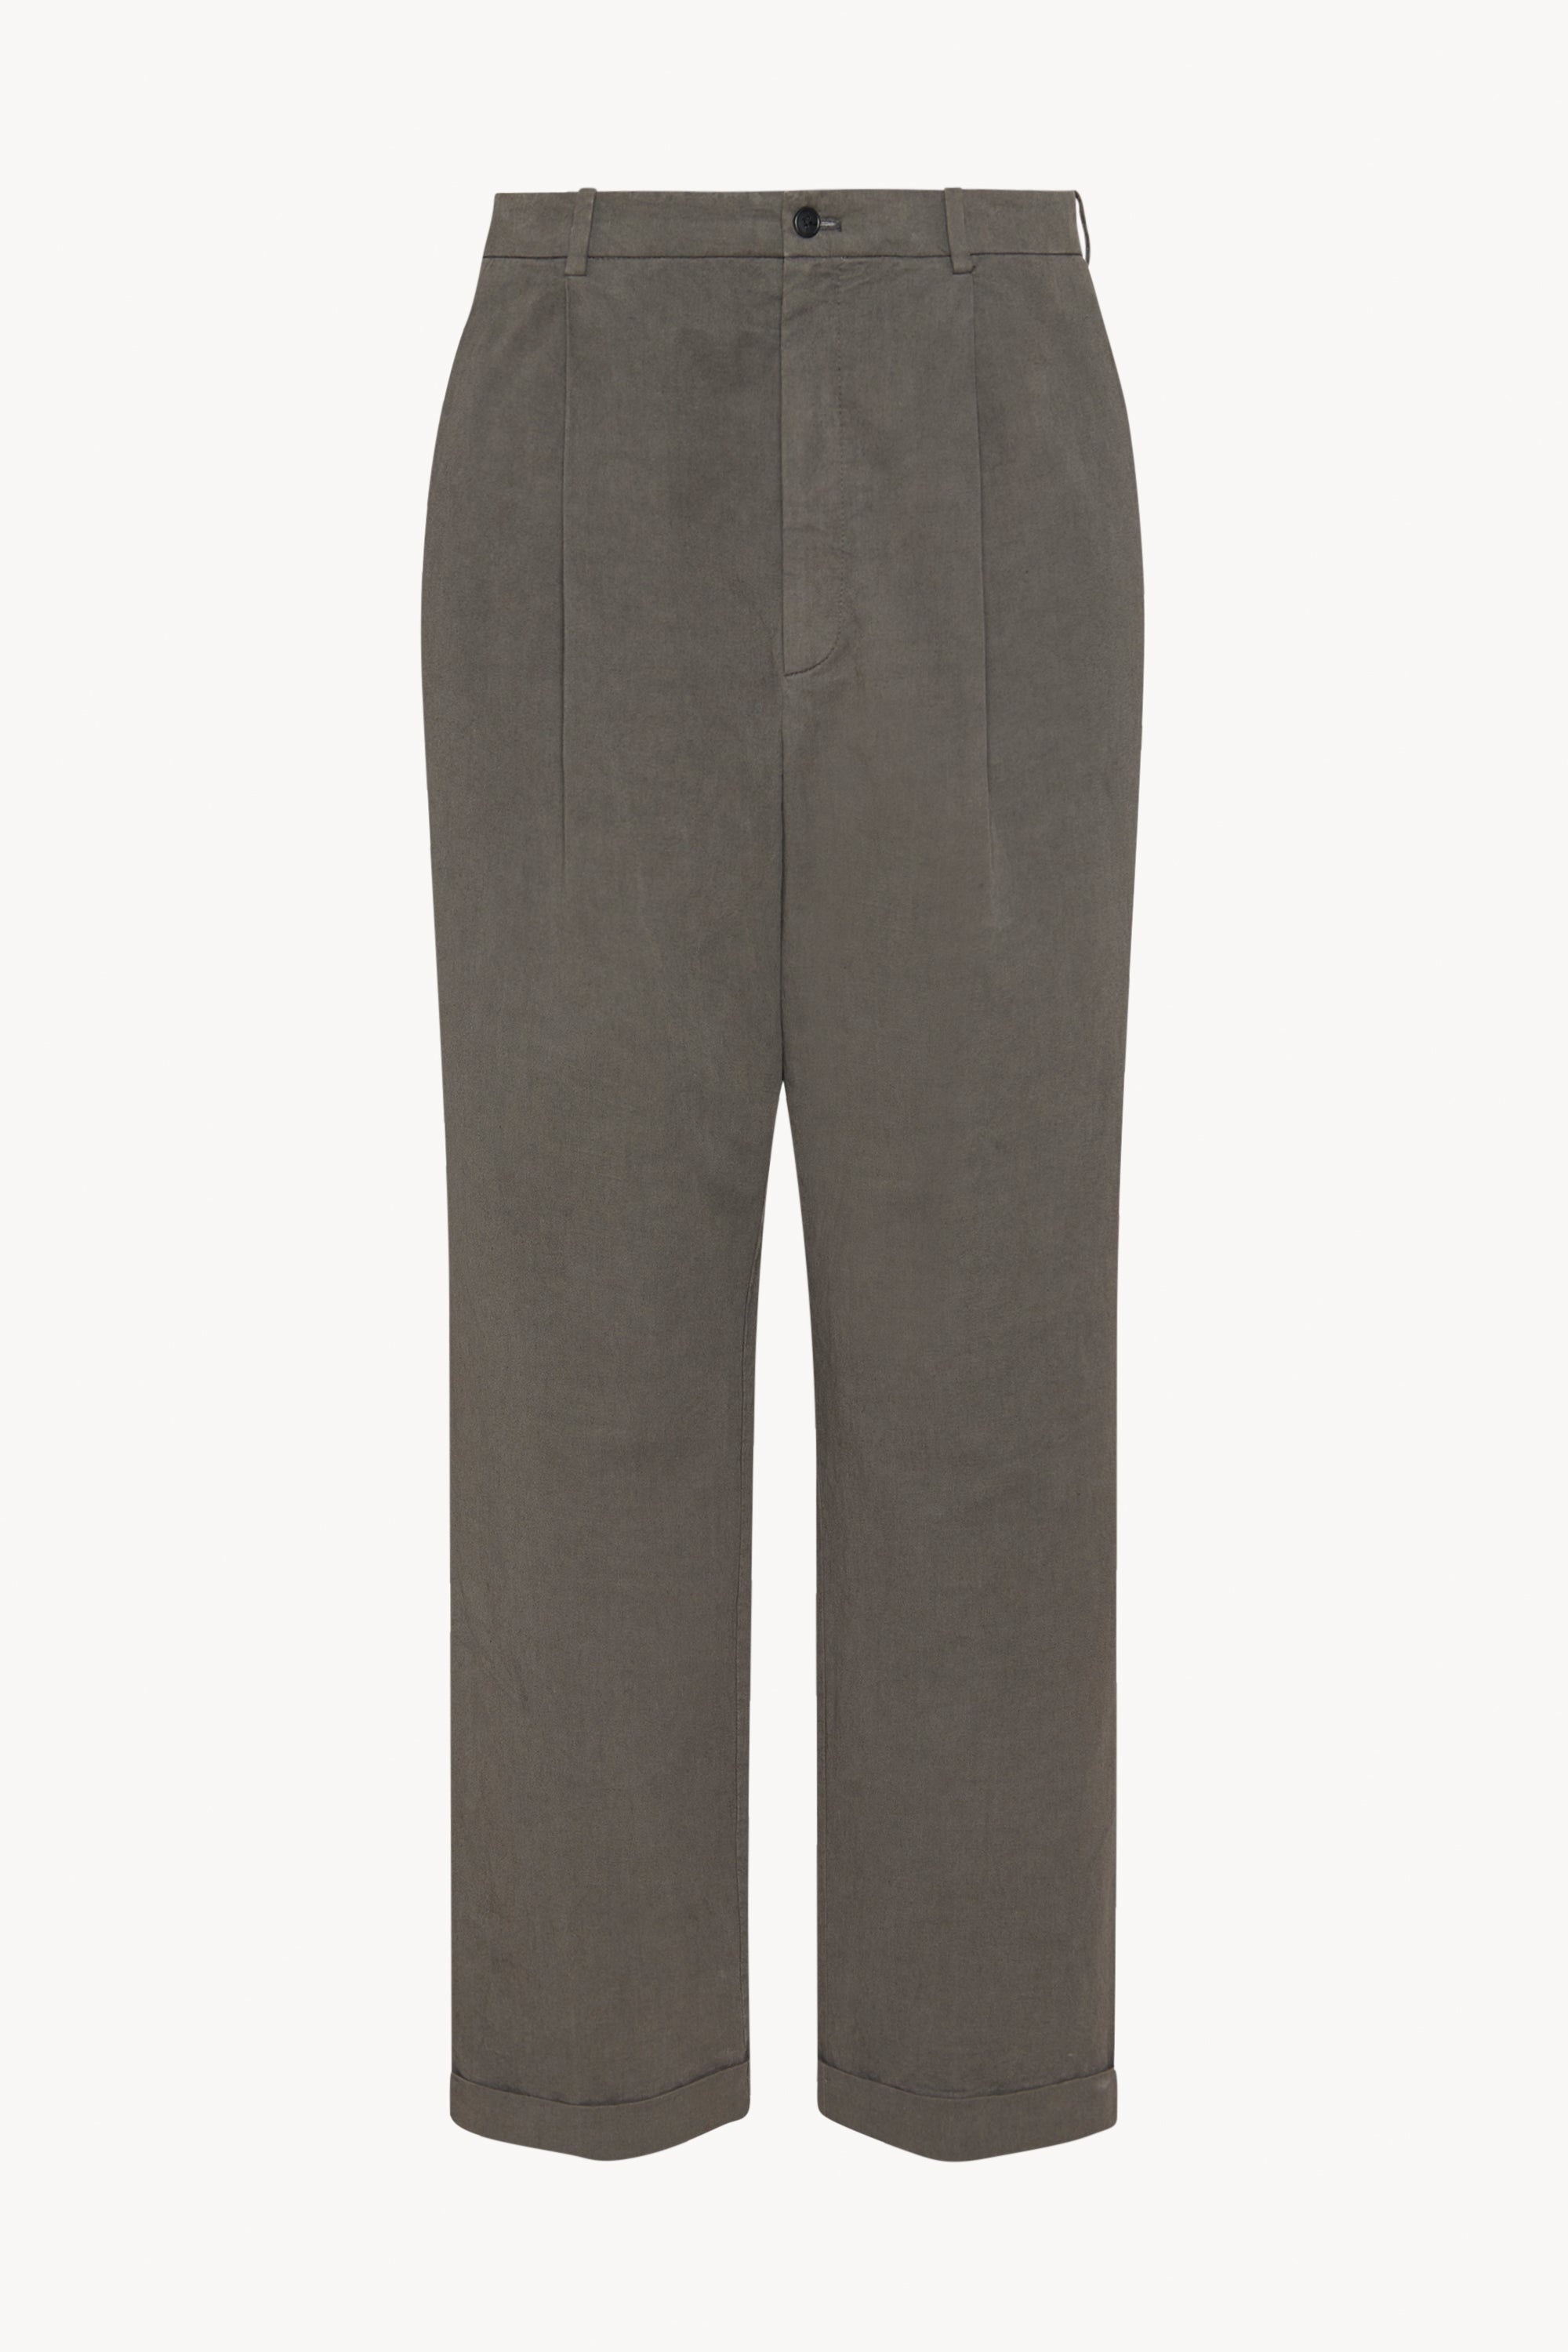 Keenan Pant in Cotton and Linen - 1